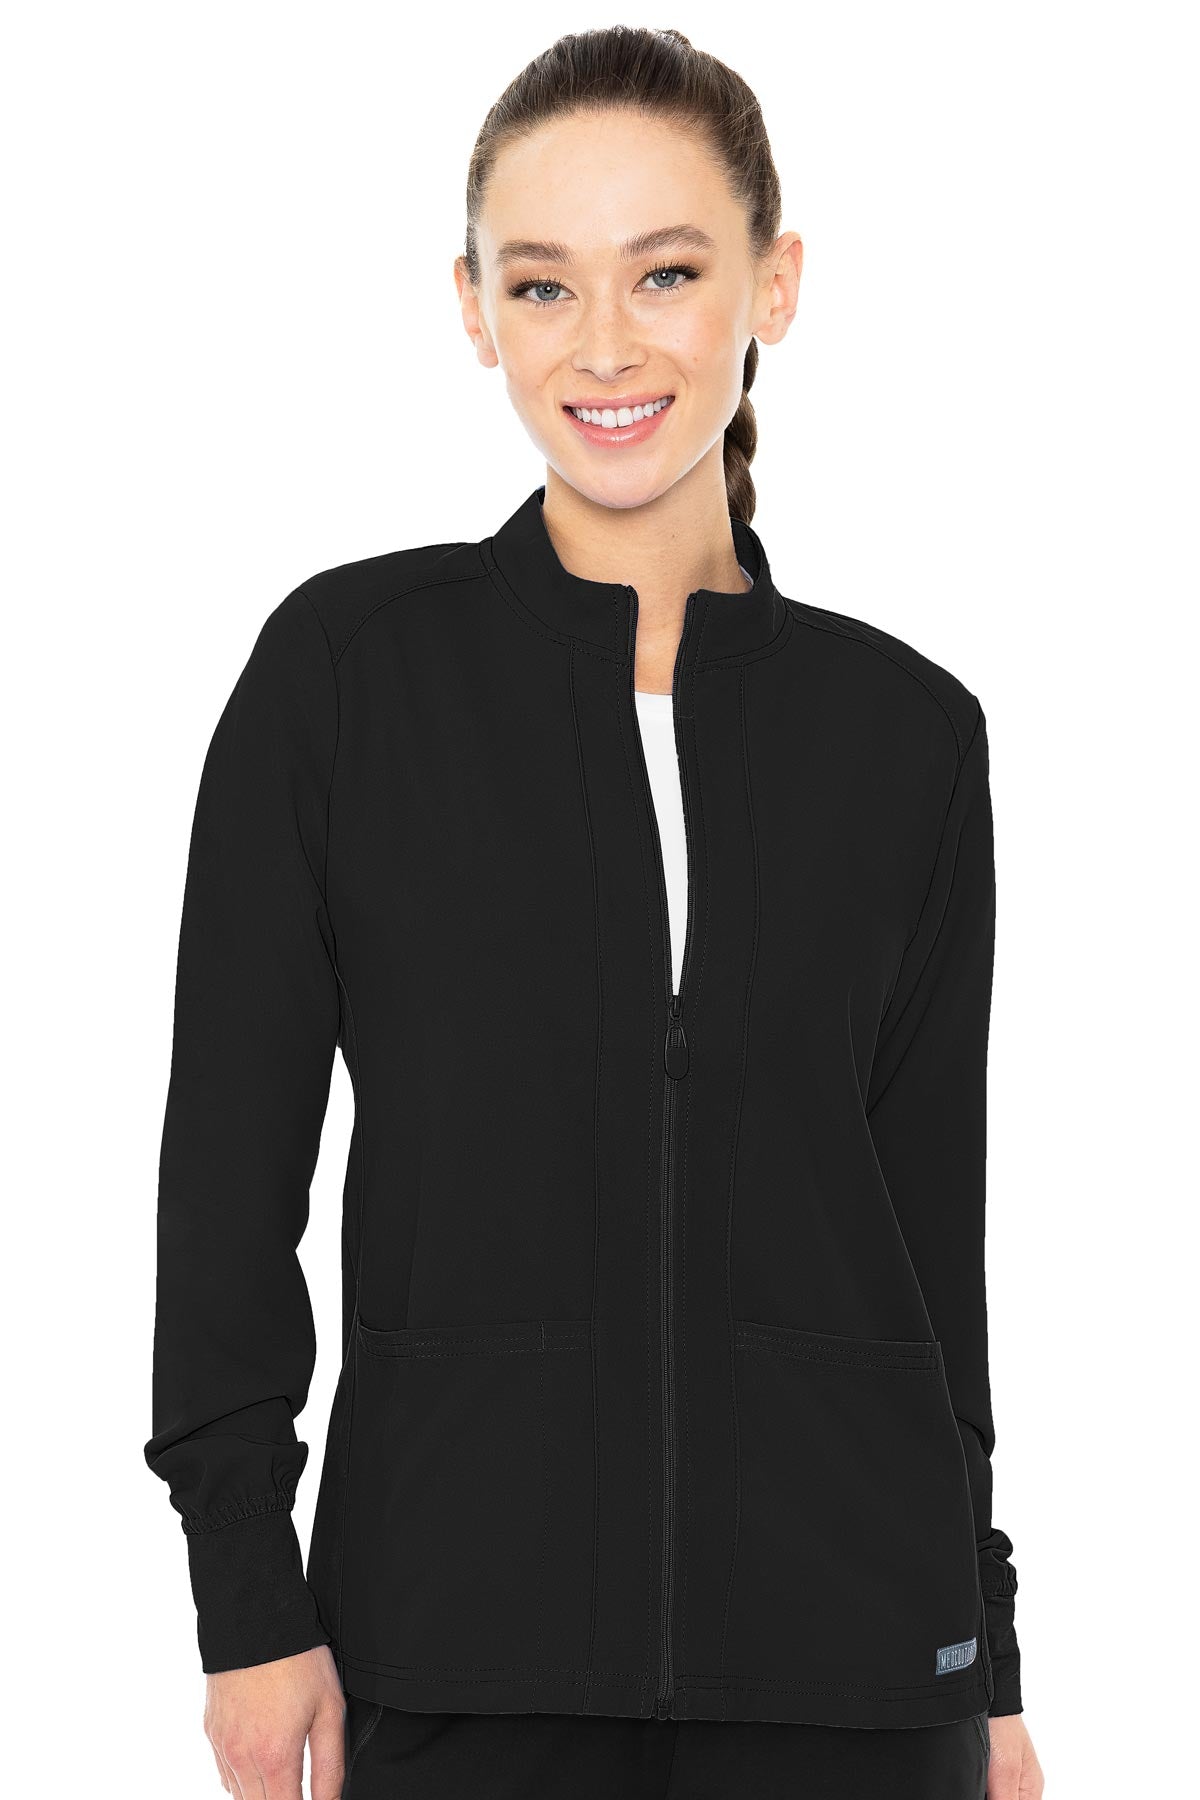 MedCouture Insight Women's Zip Front Warm-Up Jacket